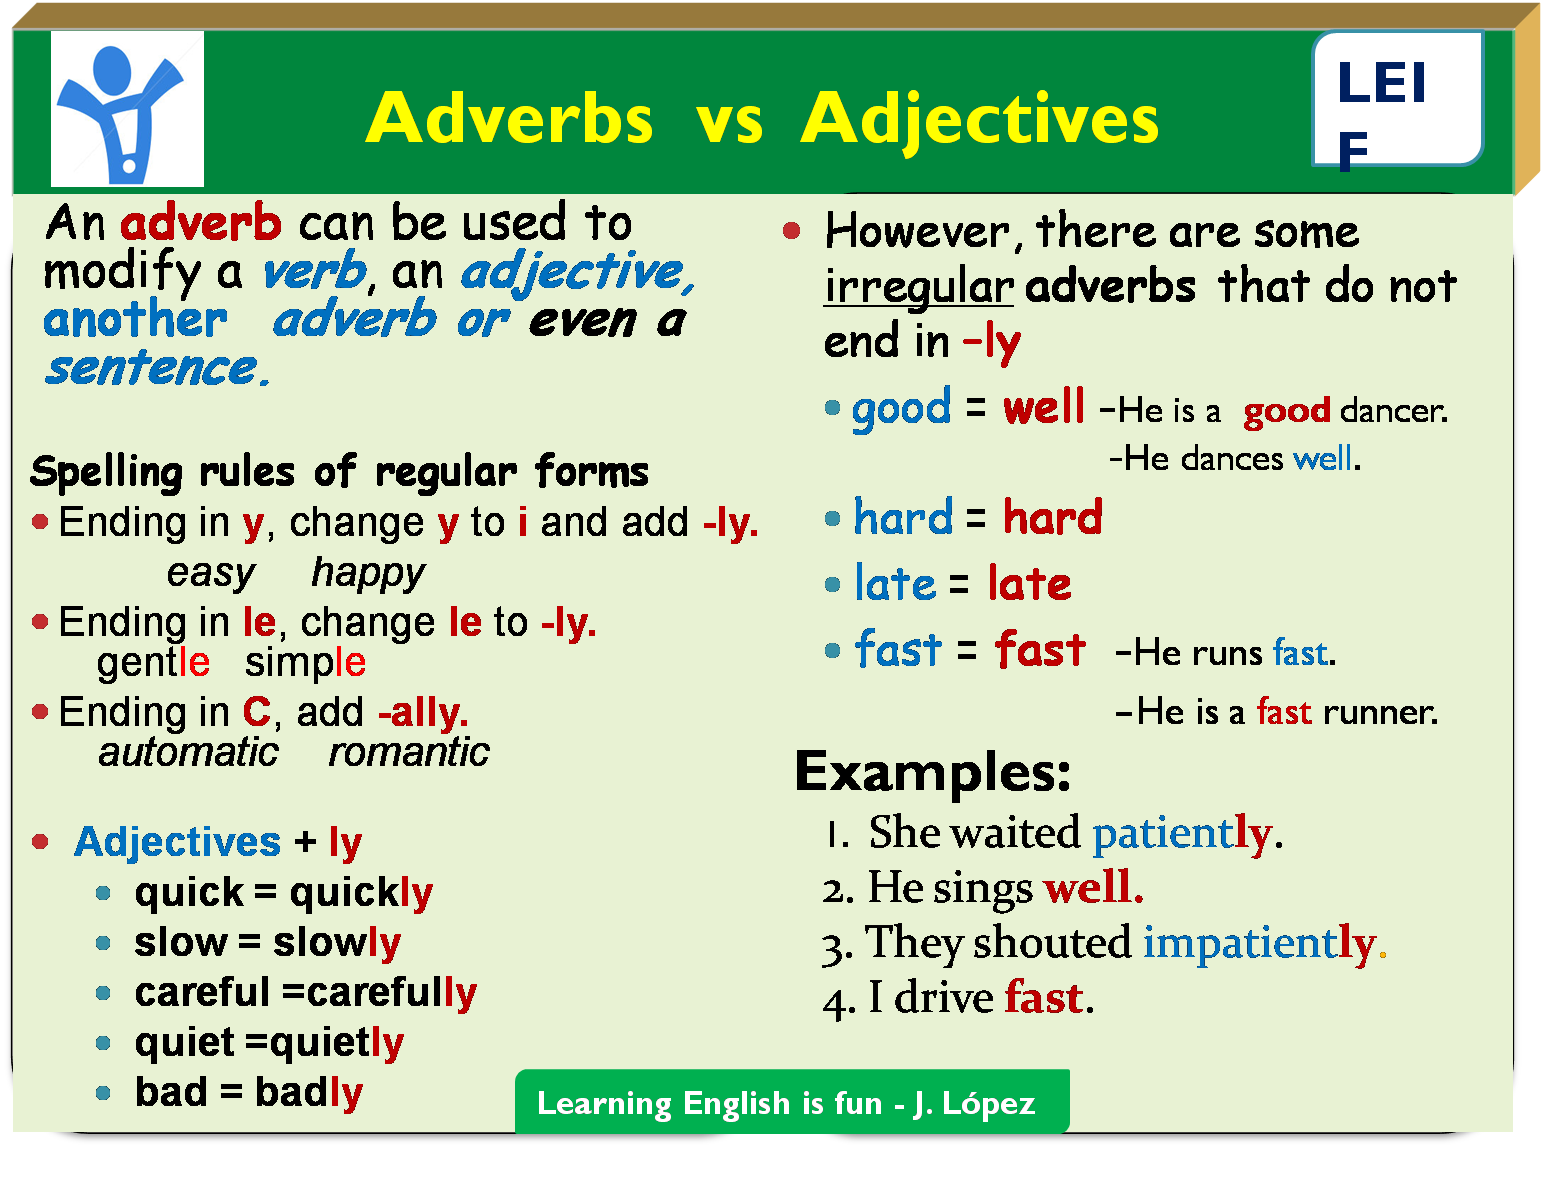 Adverbs rules. Adverbs and adjectives правила. Adjectives and adverbs правило. Adverbs from adjectives правило. Adverbs правило.